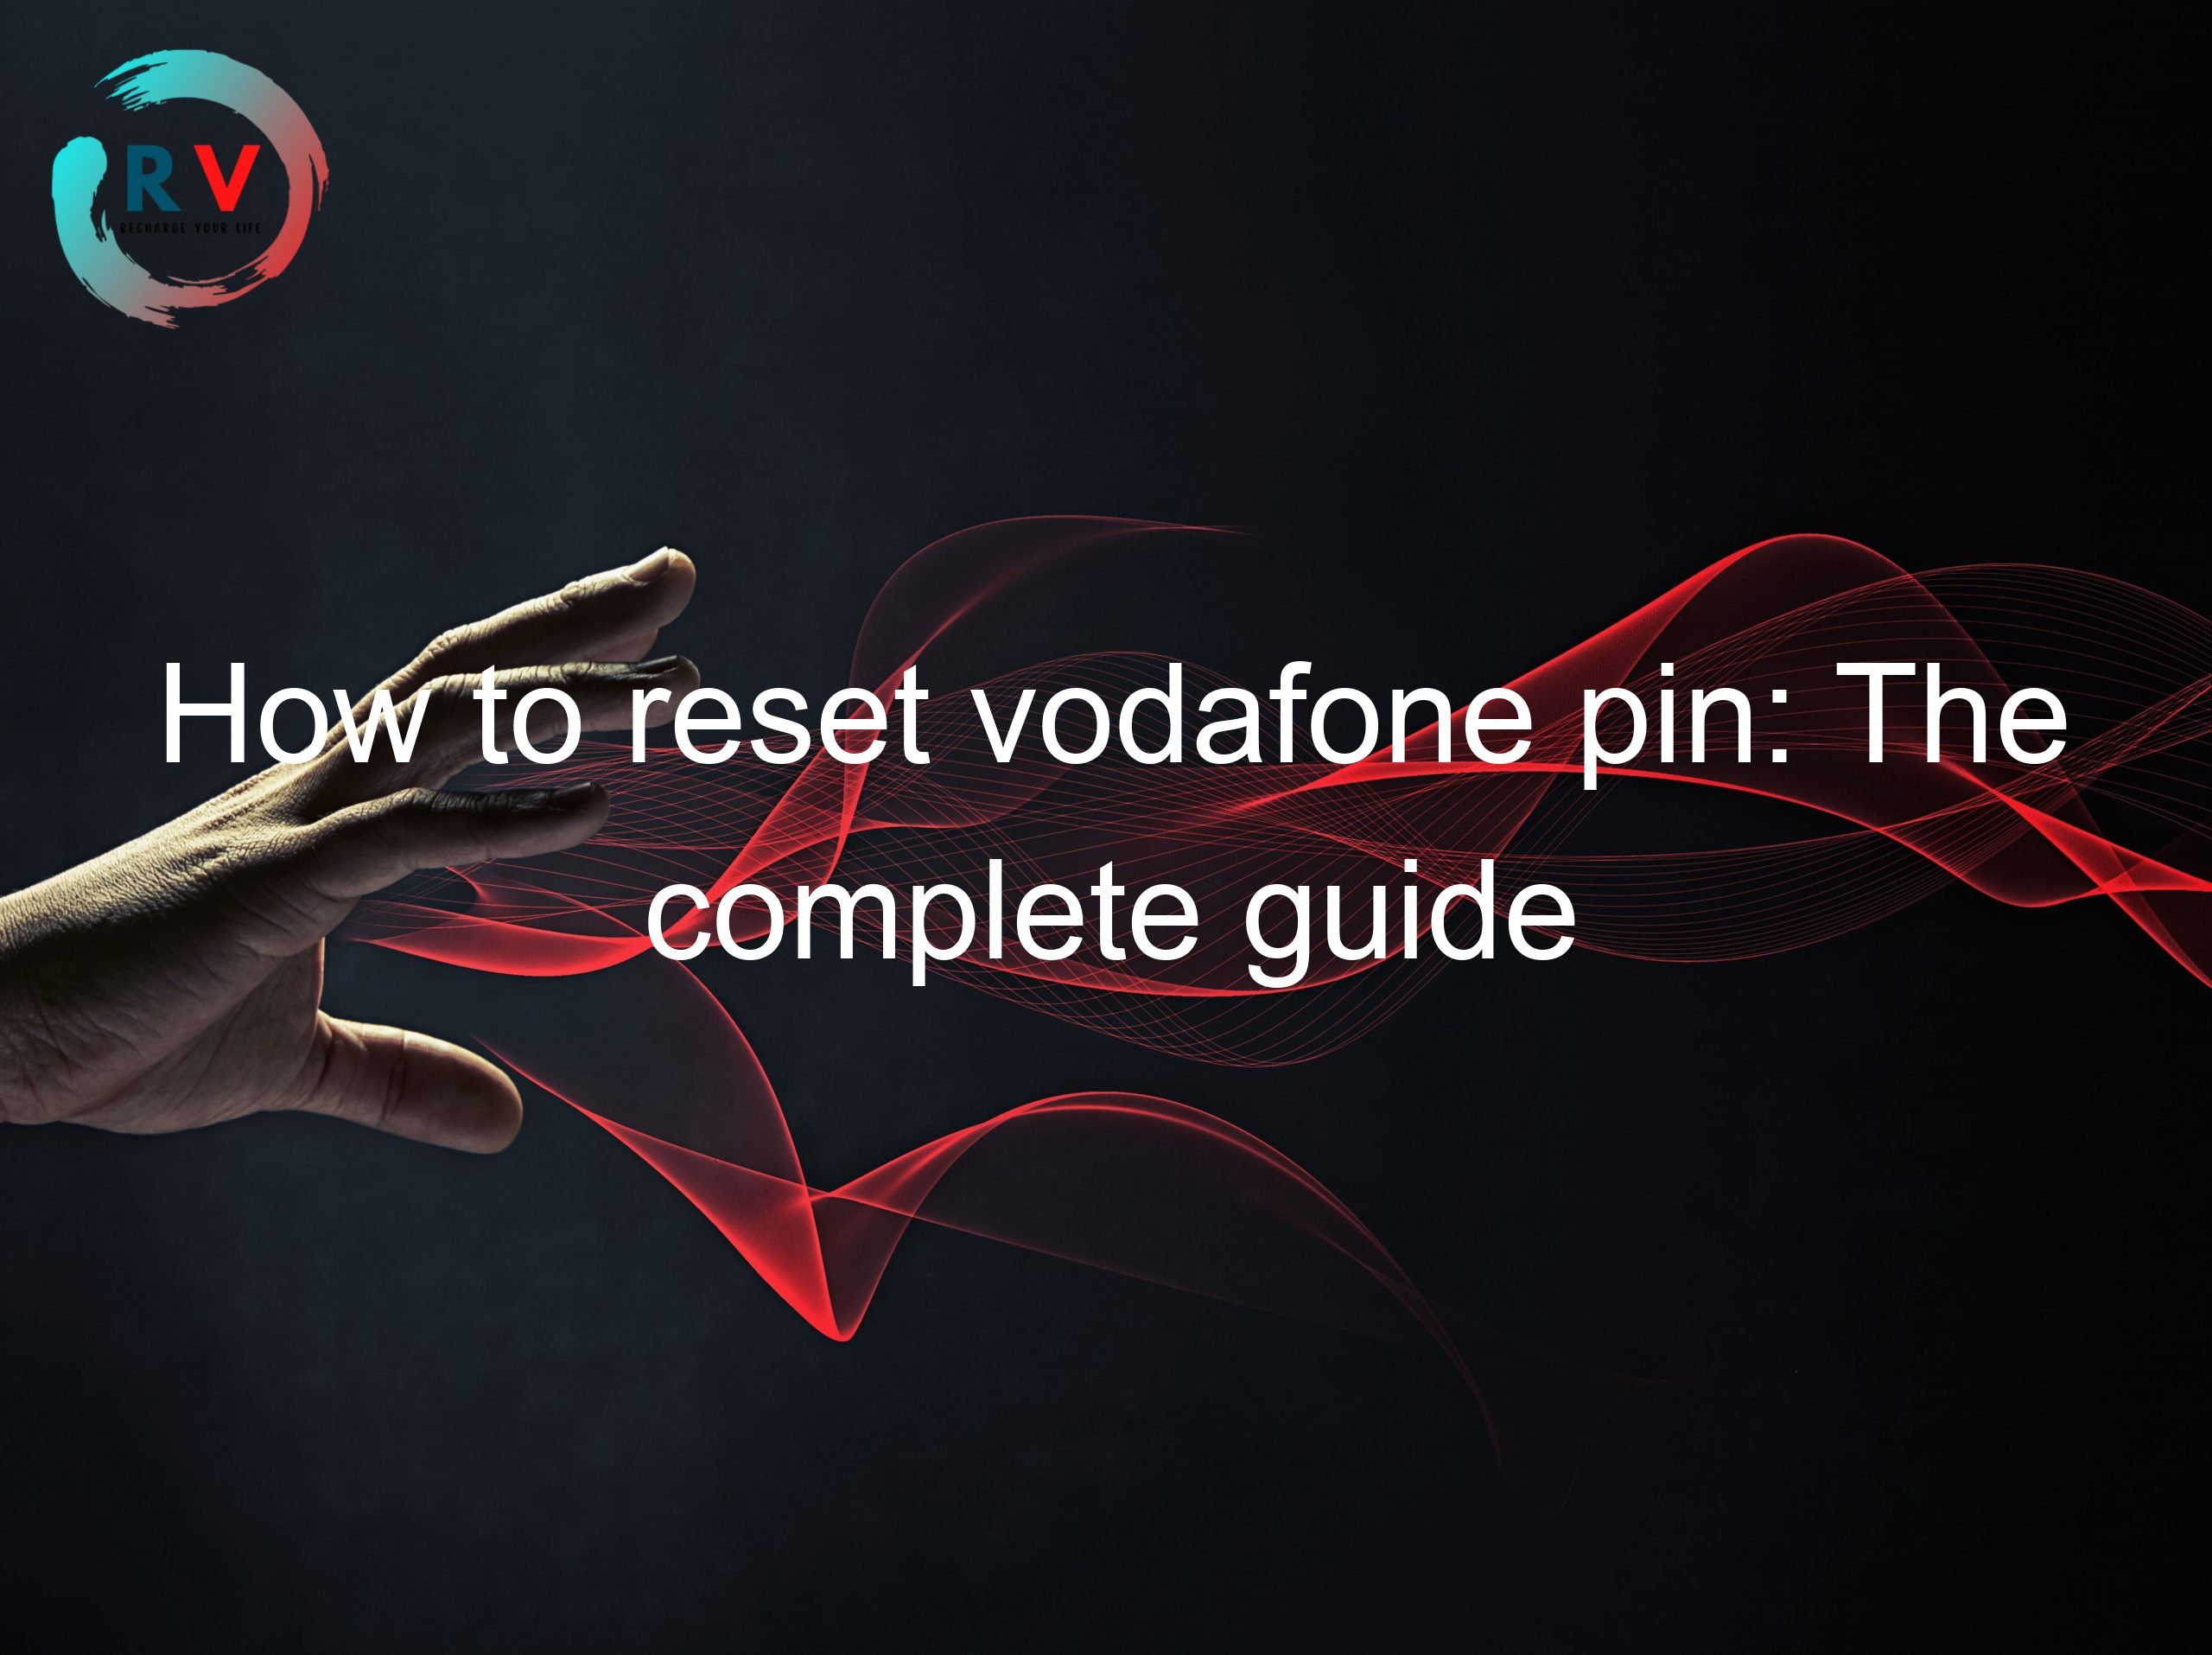 How to reset vodafone pin: The complete guide